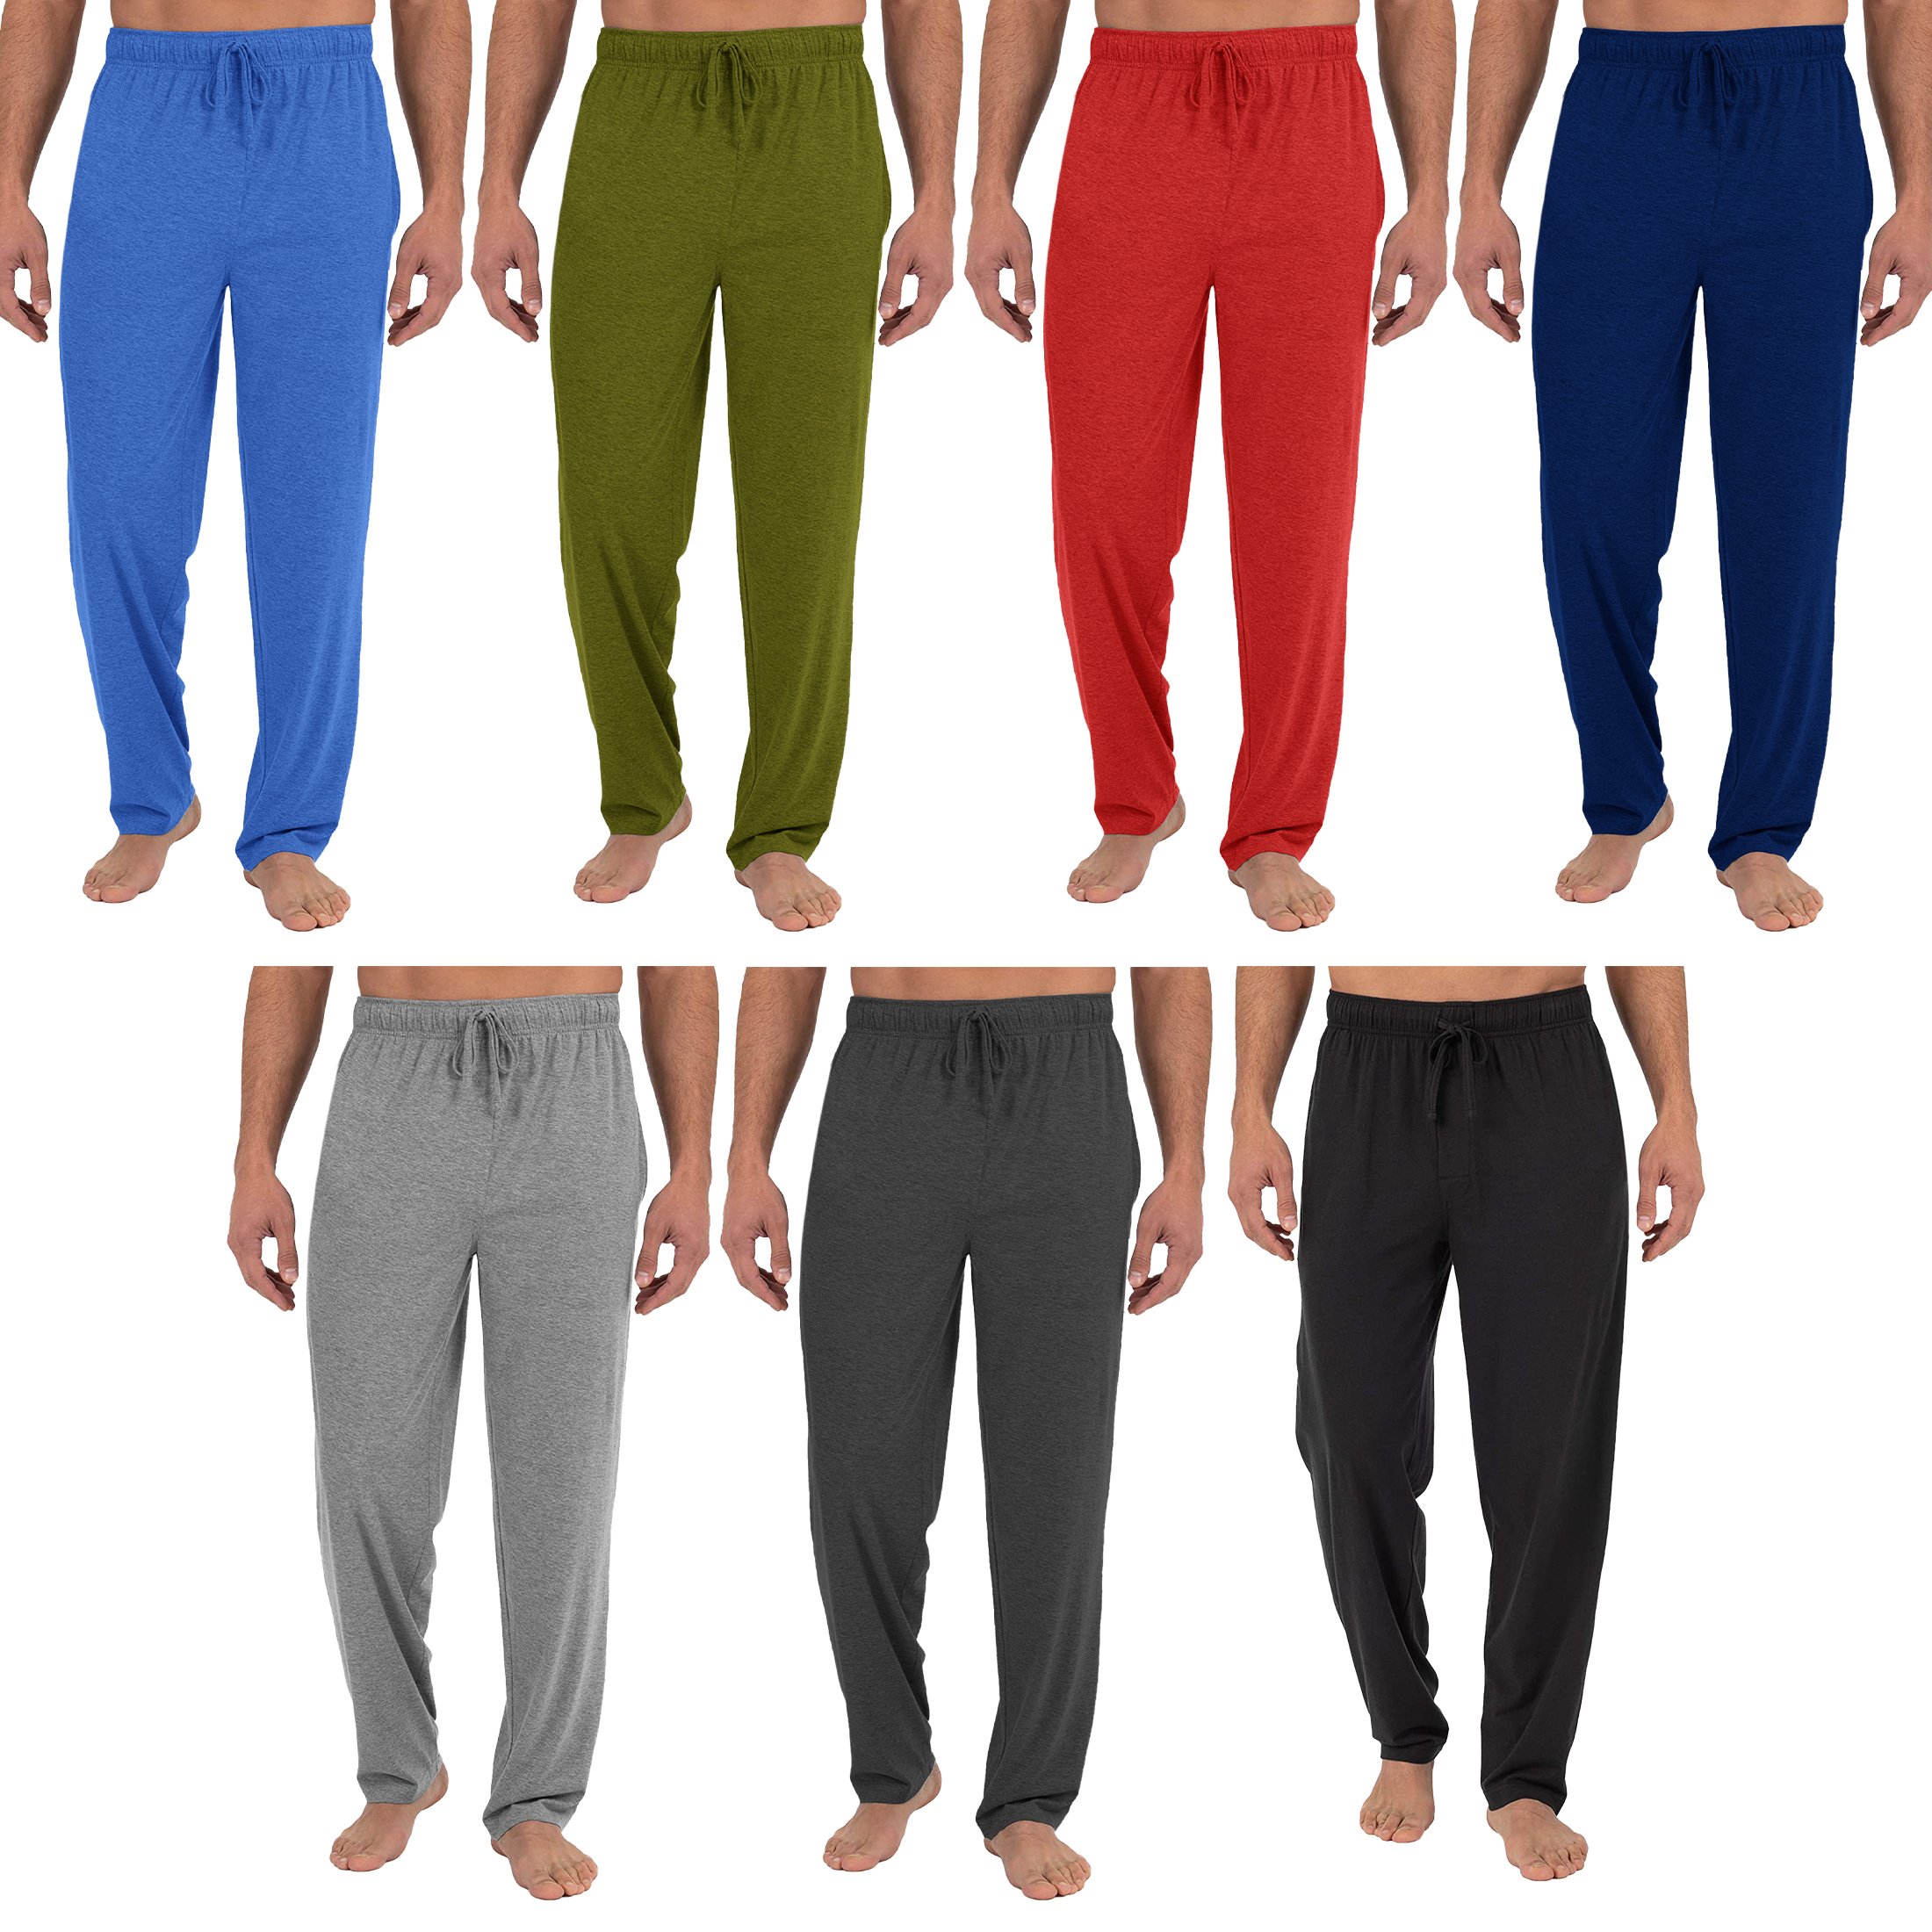 3-Pack: Men's Soft Jersey Knit Long Lounge Sleep Pants With Pockets - Solid, Medium